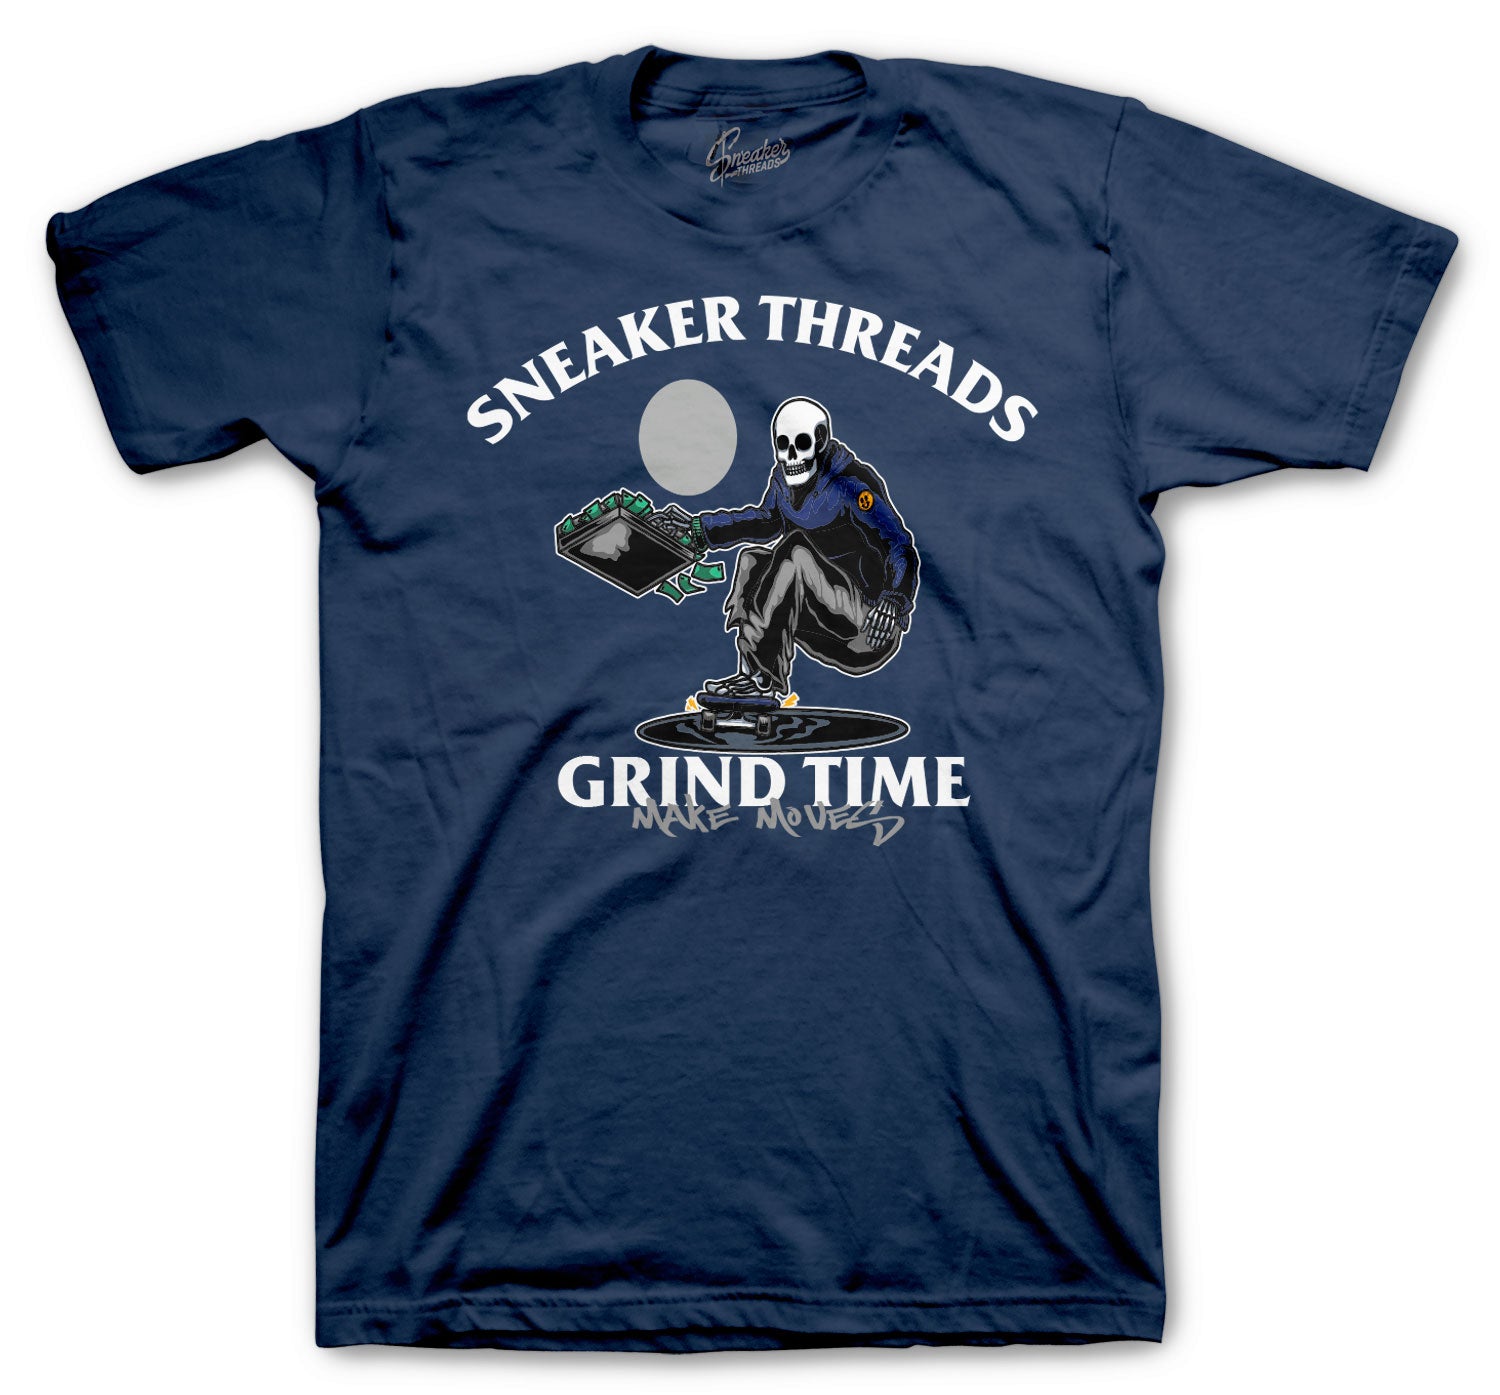 Mens t shirt collection matching with mens jordan 1 midnight navy sneakers 